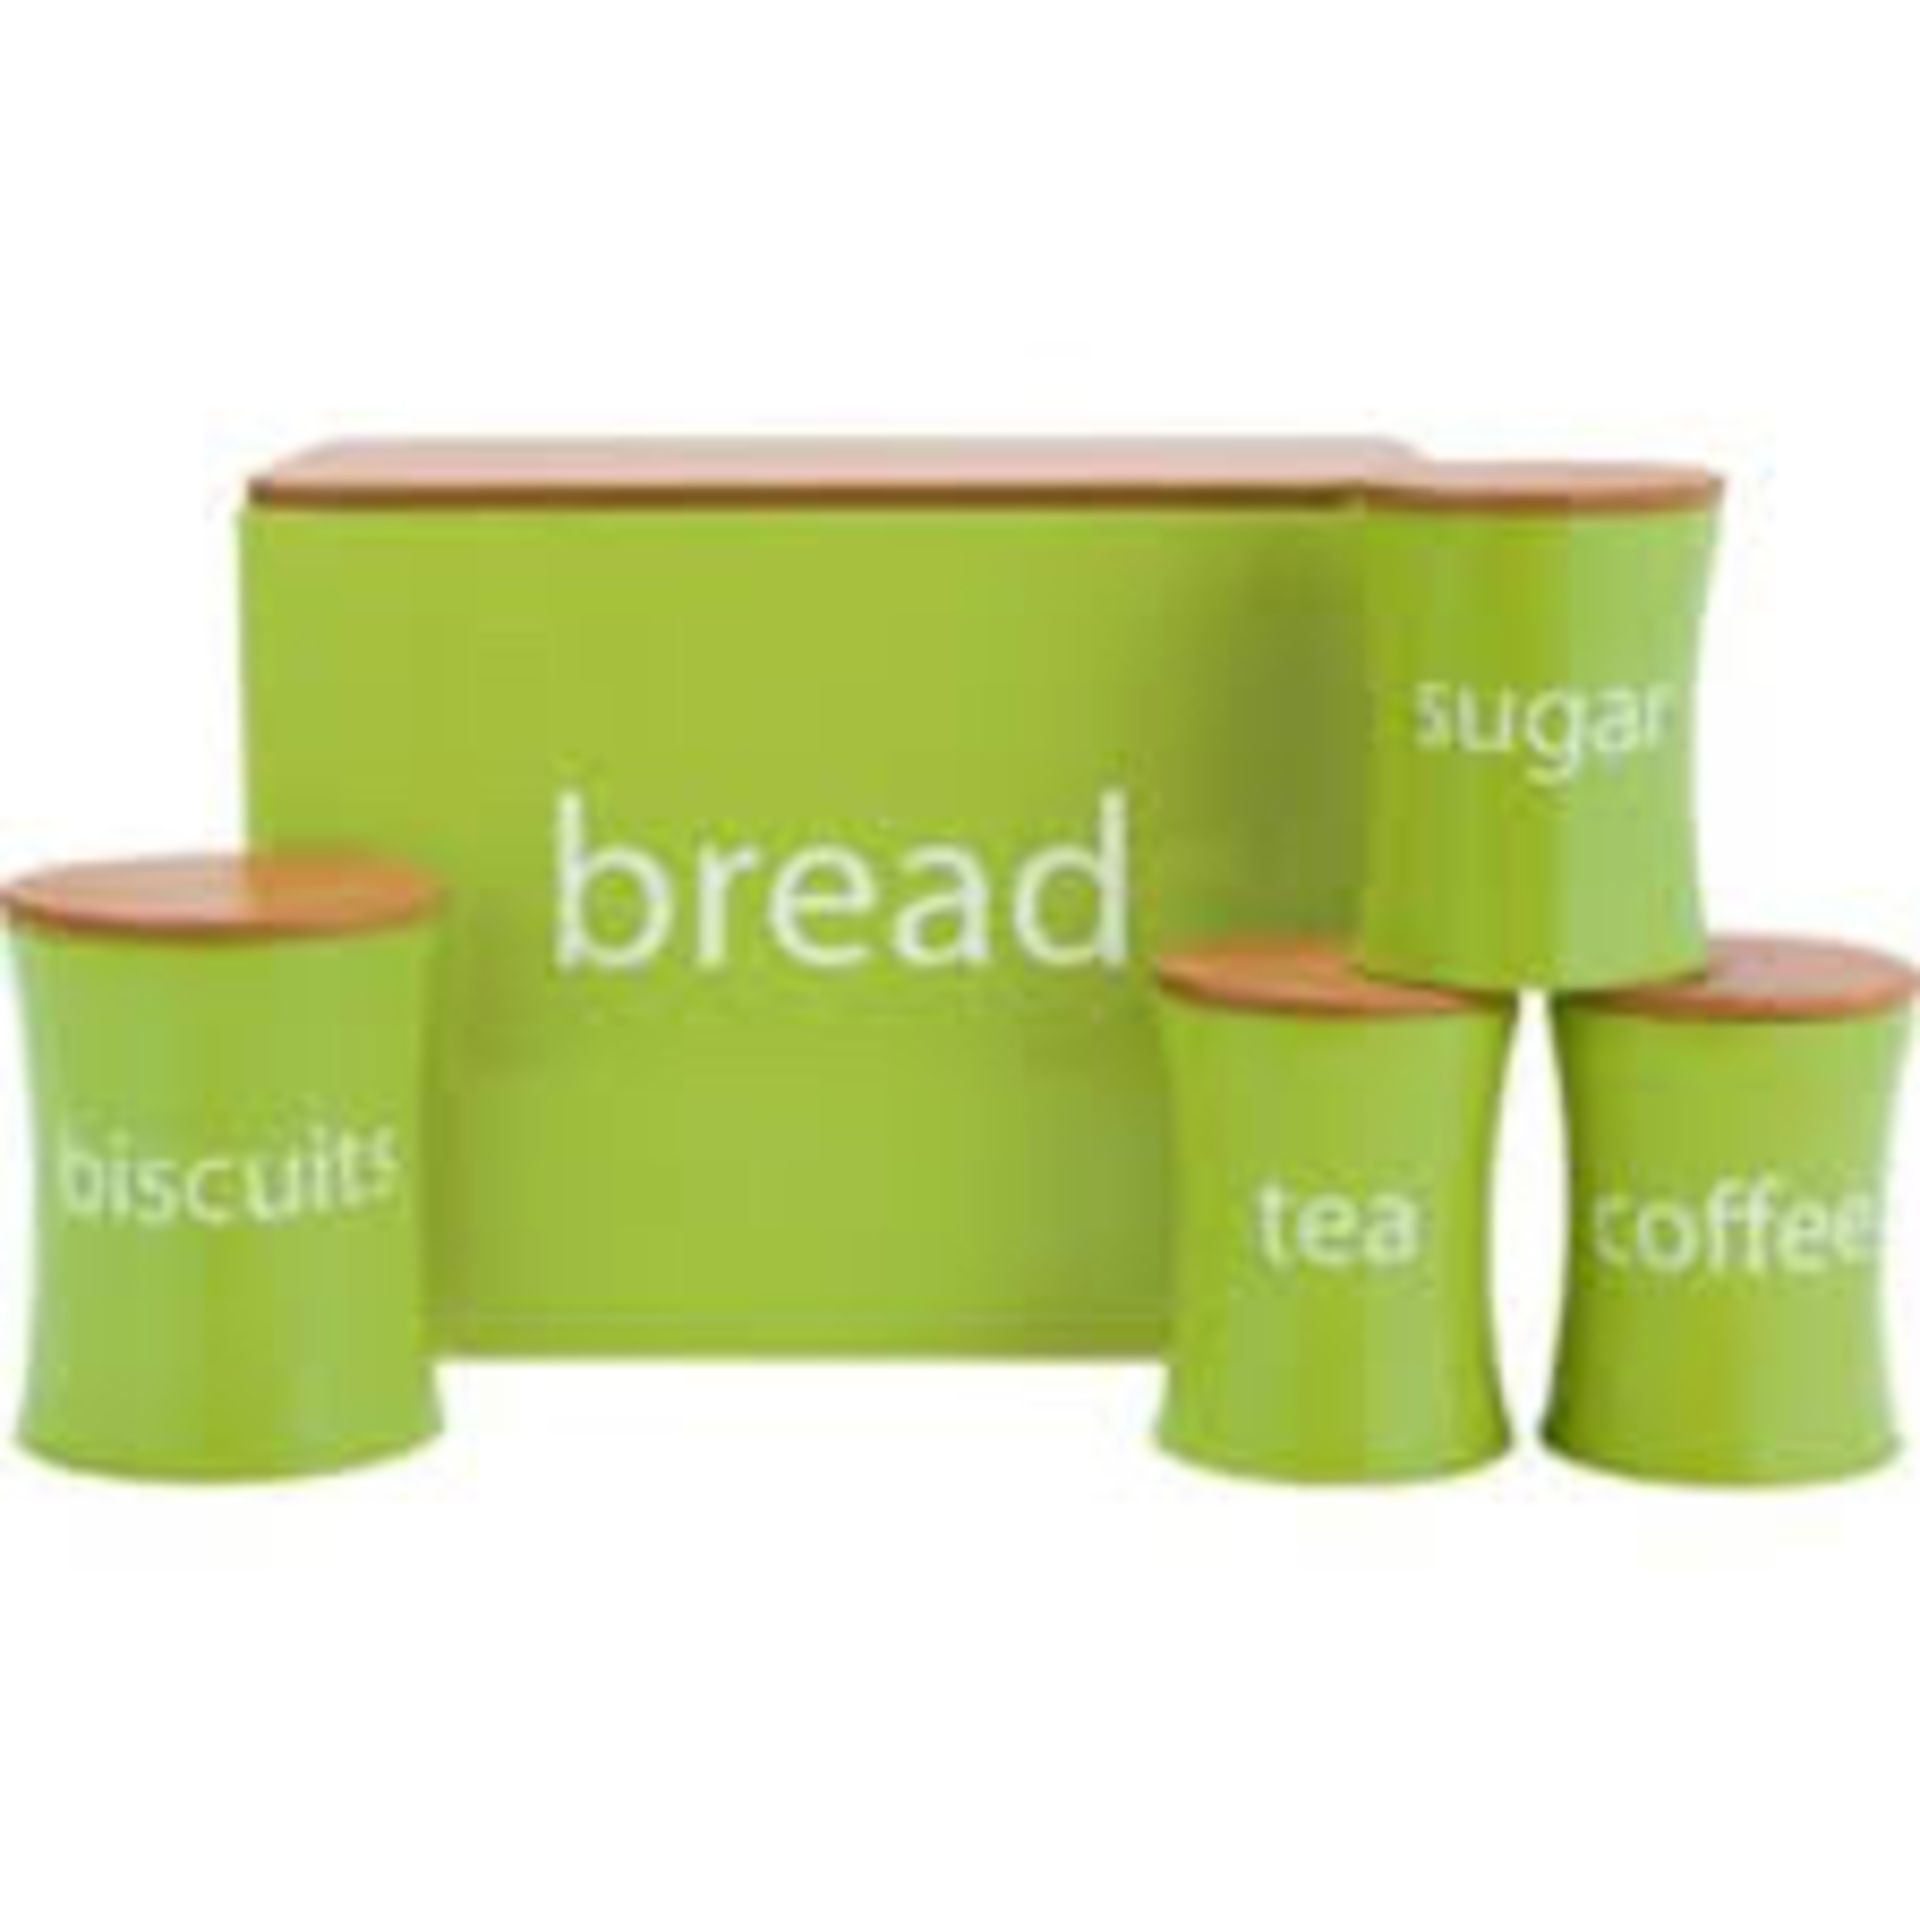 6 x 5 Piece Kitchen Storage Sets (GREEN) With bamboo lids. Very high retail value. Each set